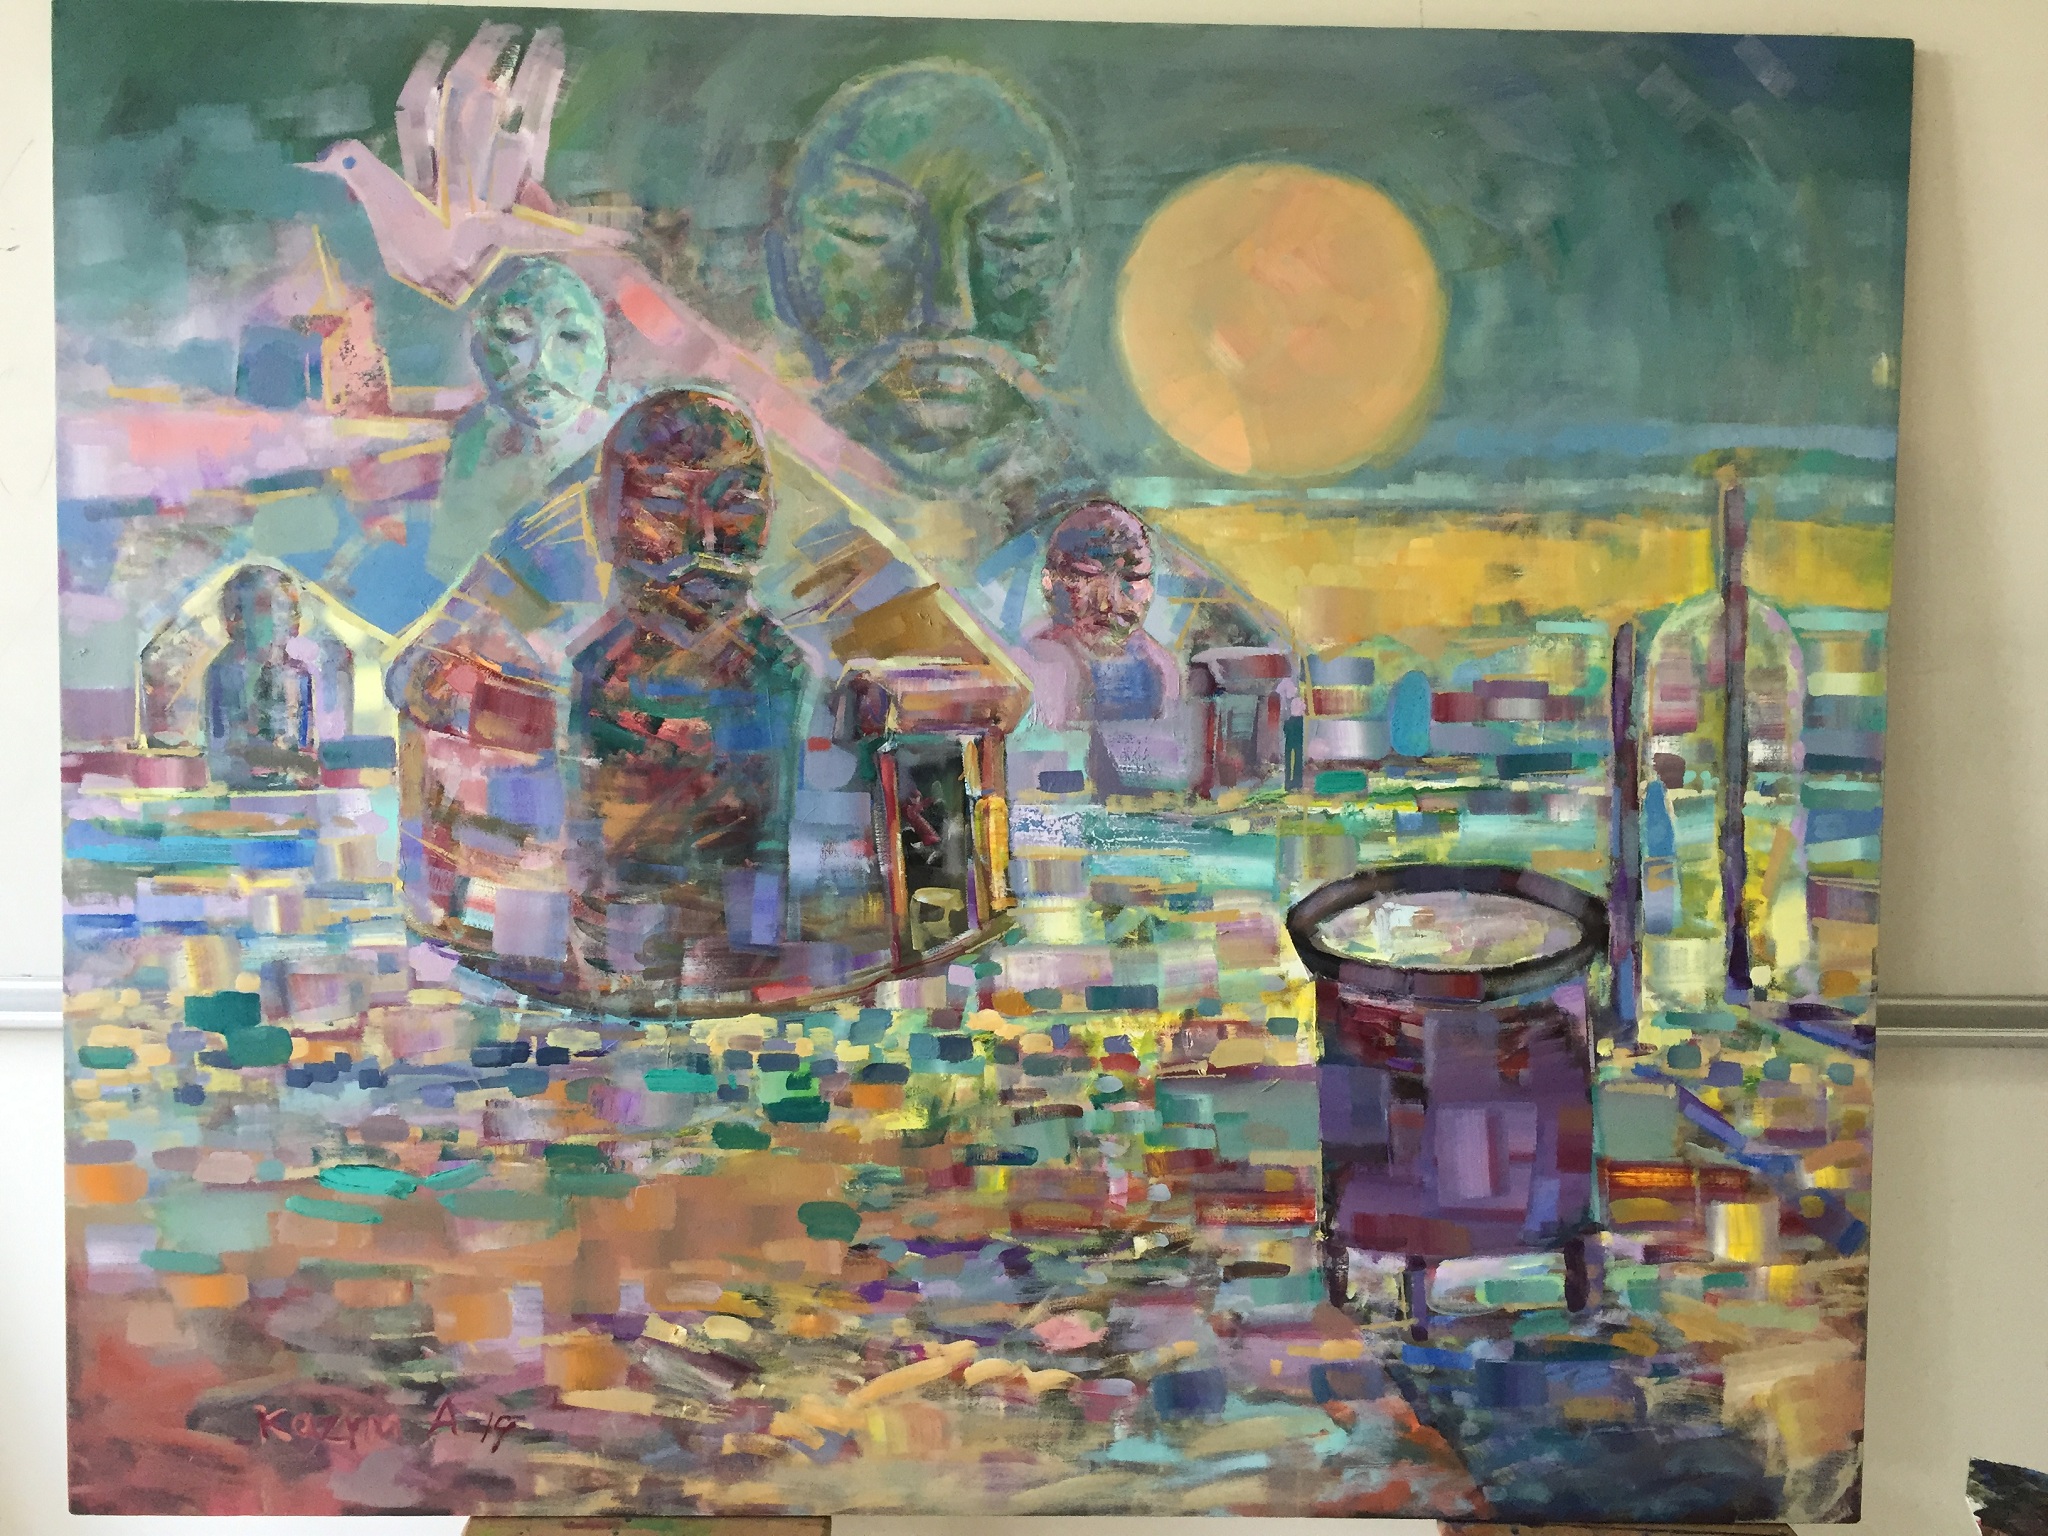 “Kazakhstan Artists Exhibition” Consisting of 50 Artworks of 12 Artists ...